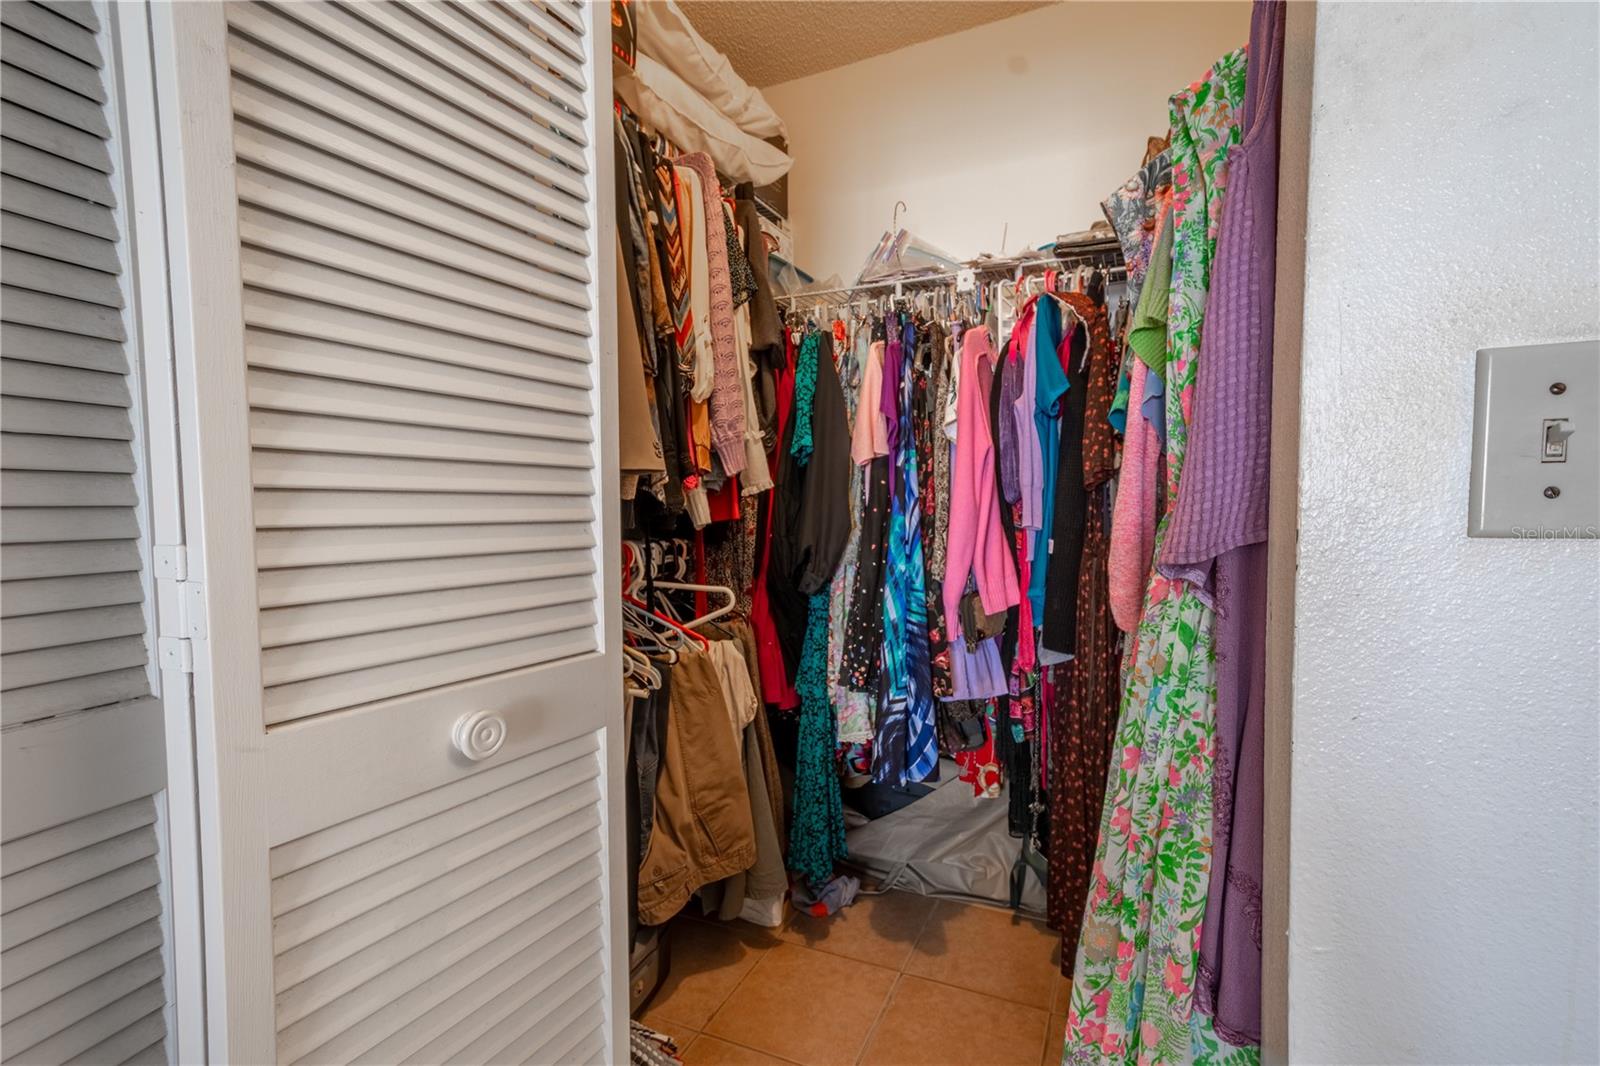 The primary suite features a large walk-in closet.